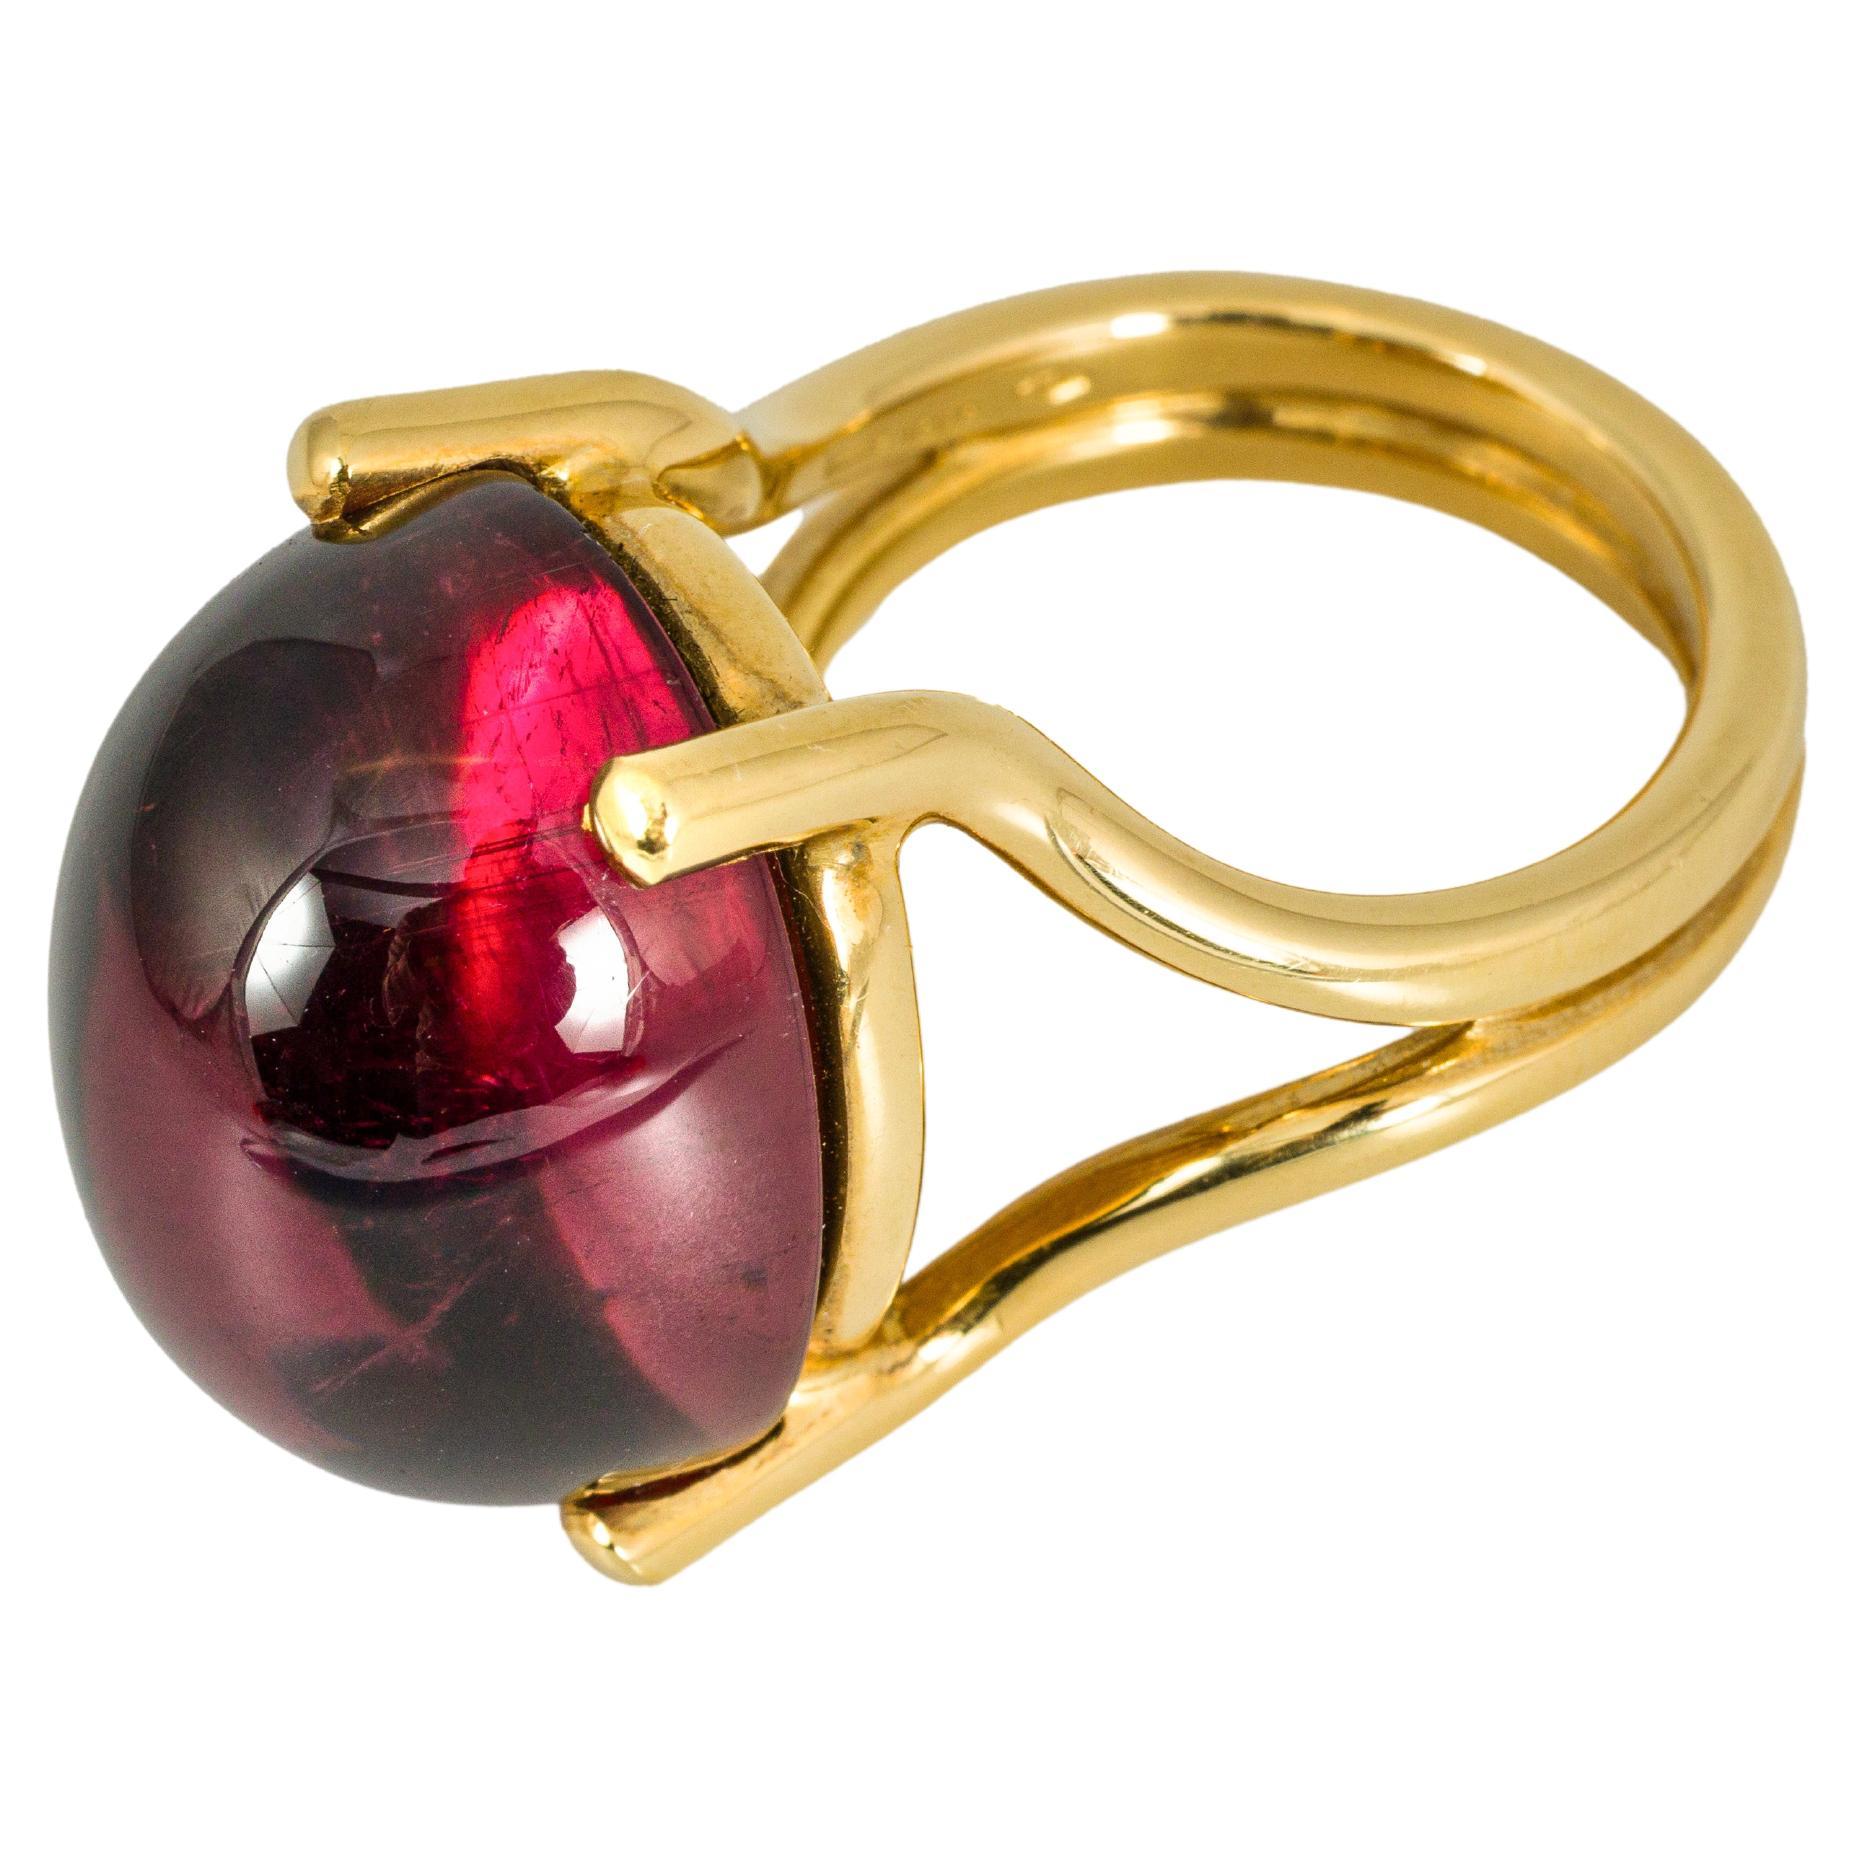 "Costis" Stone on Wire Ring with an Oval Cabochon 37.74 carats Pink Tourmaline For Sale